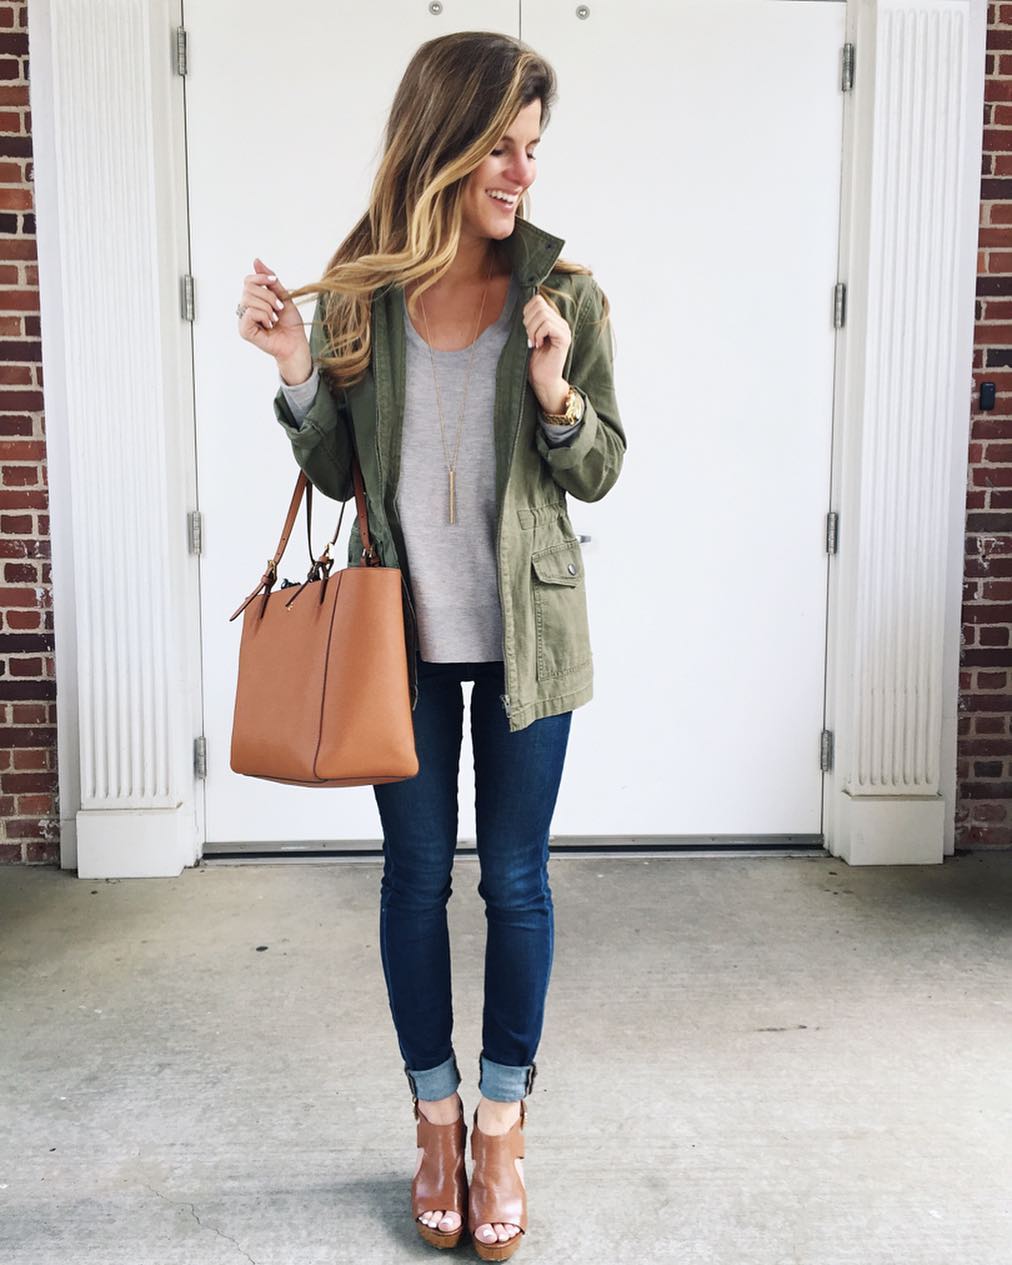 @brightonkeller #OOTD wearing grey sweater utility jacket blue jeans and cognac wedges with tory burch york tote // fall outfit ideas // transitional outfit for fall 